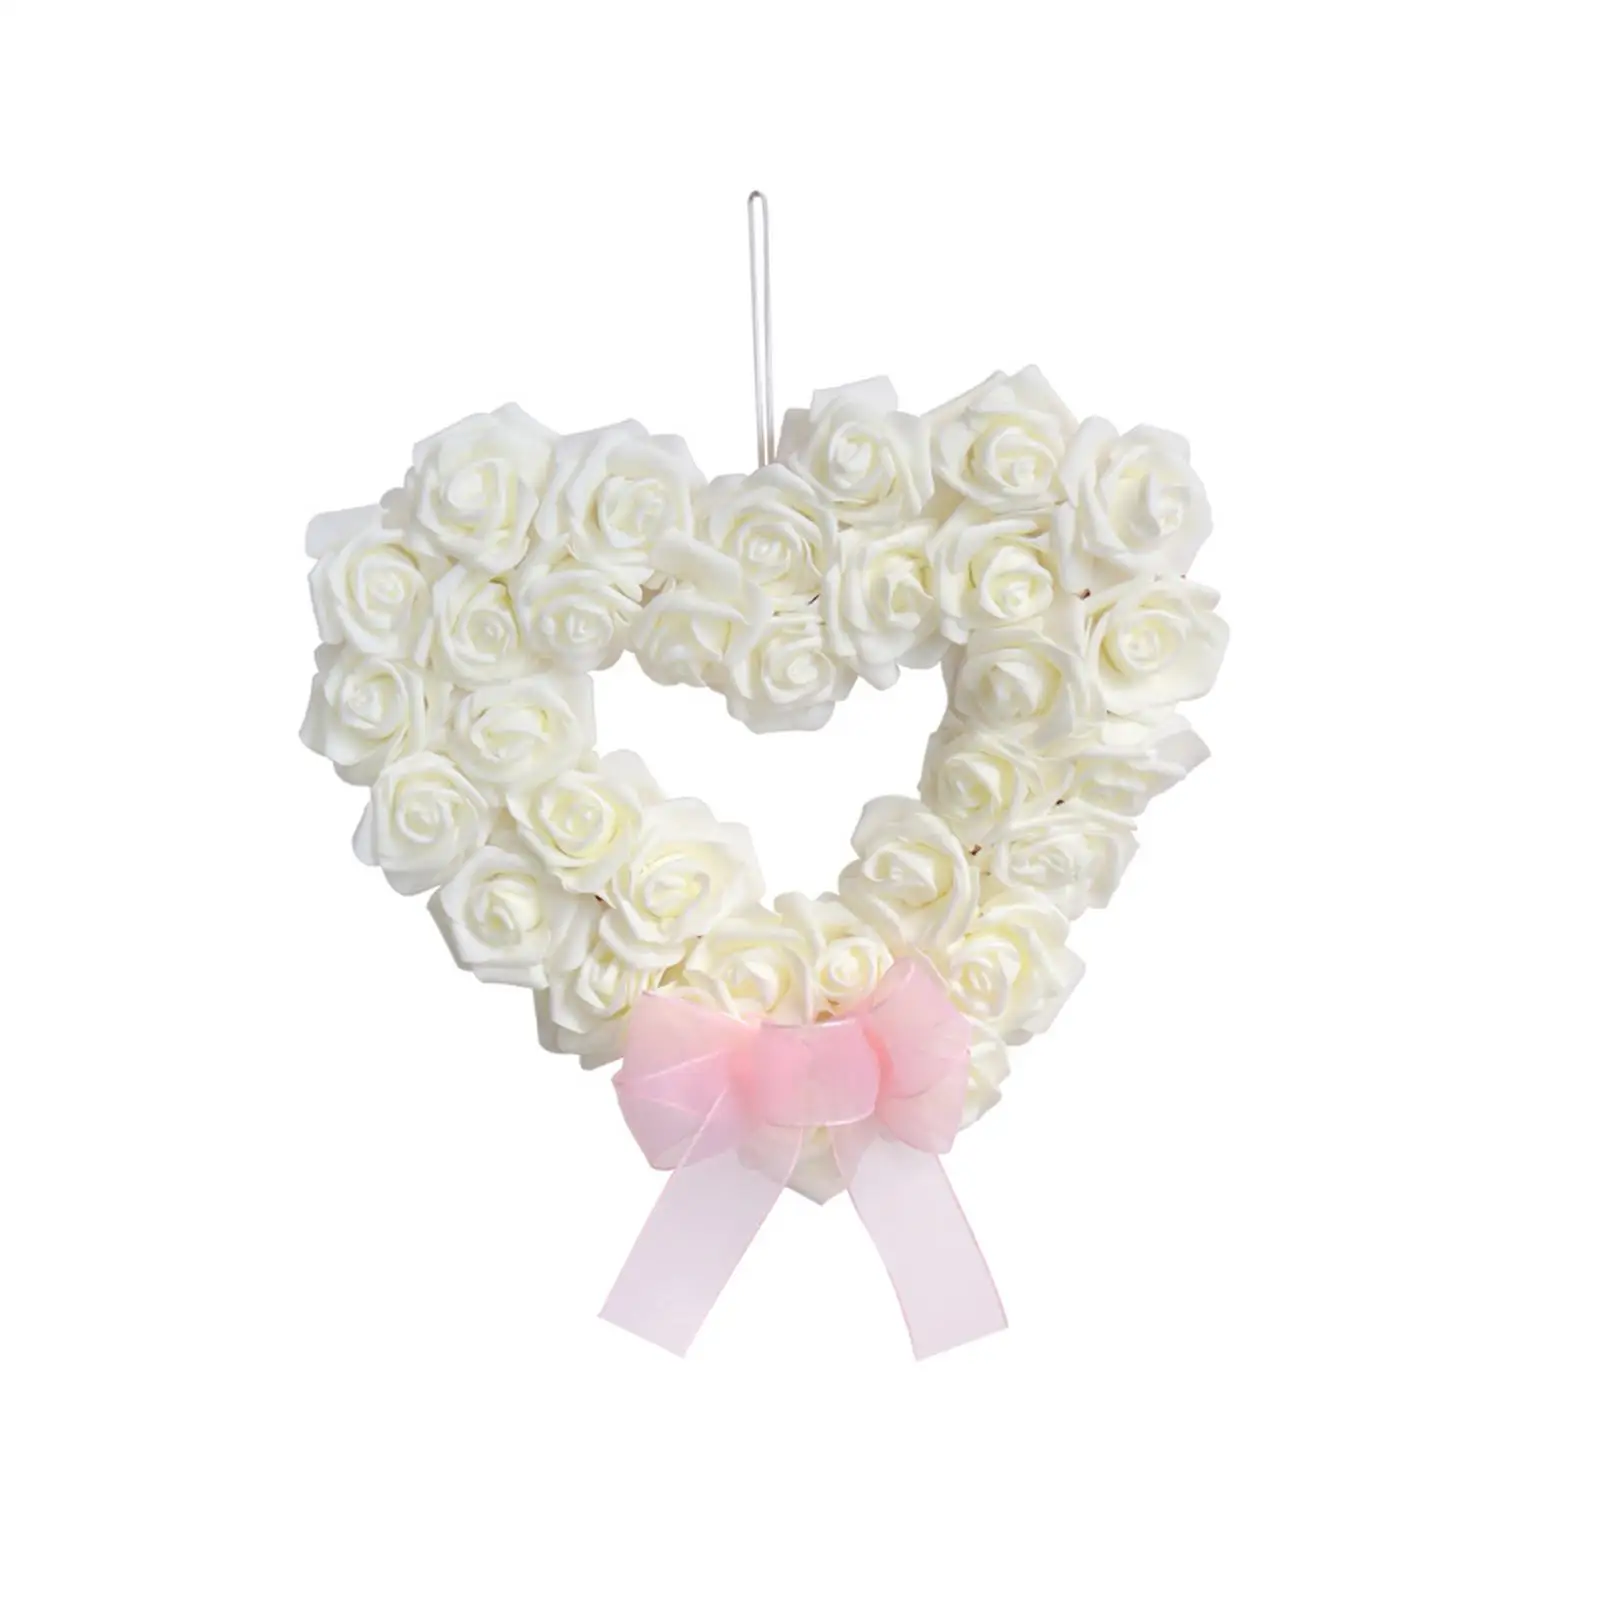 Artificial Wreath Realistic Heart Shaped for Wedding Garden Background Party